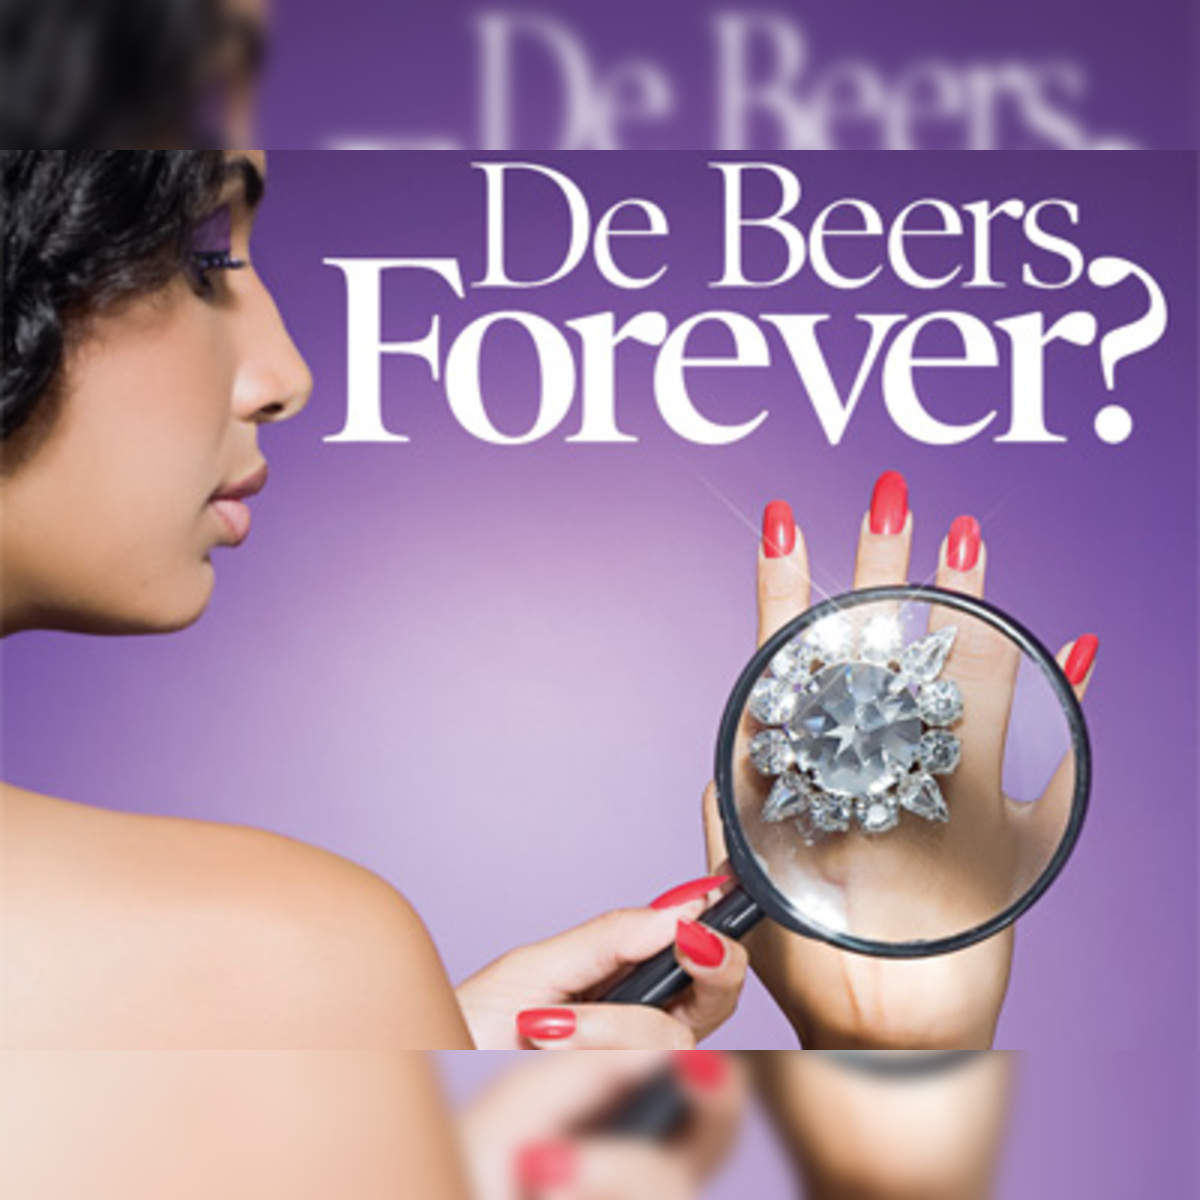 1994 - DeBeers - A Diamond is Forever Commercial 